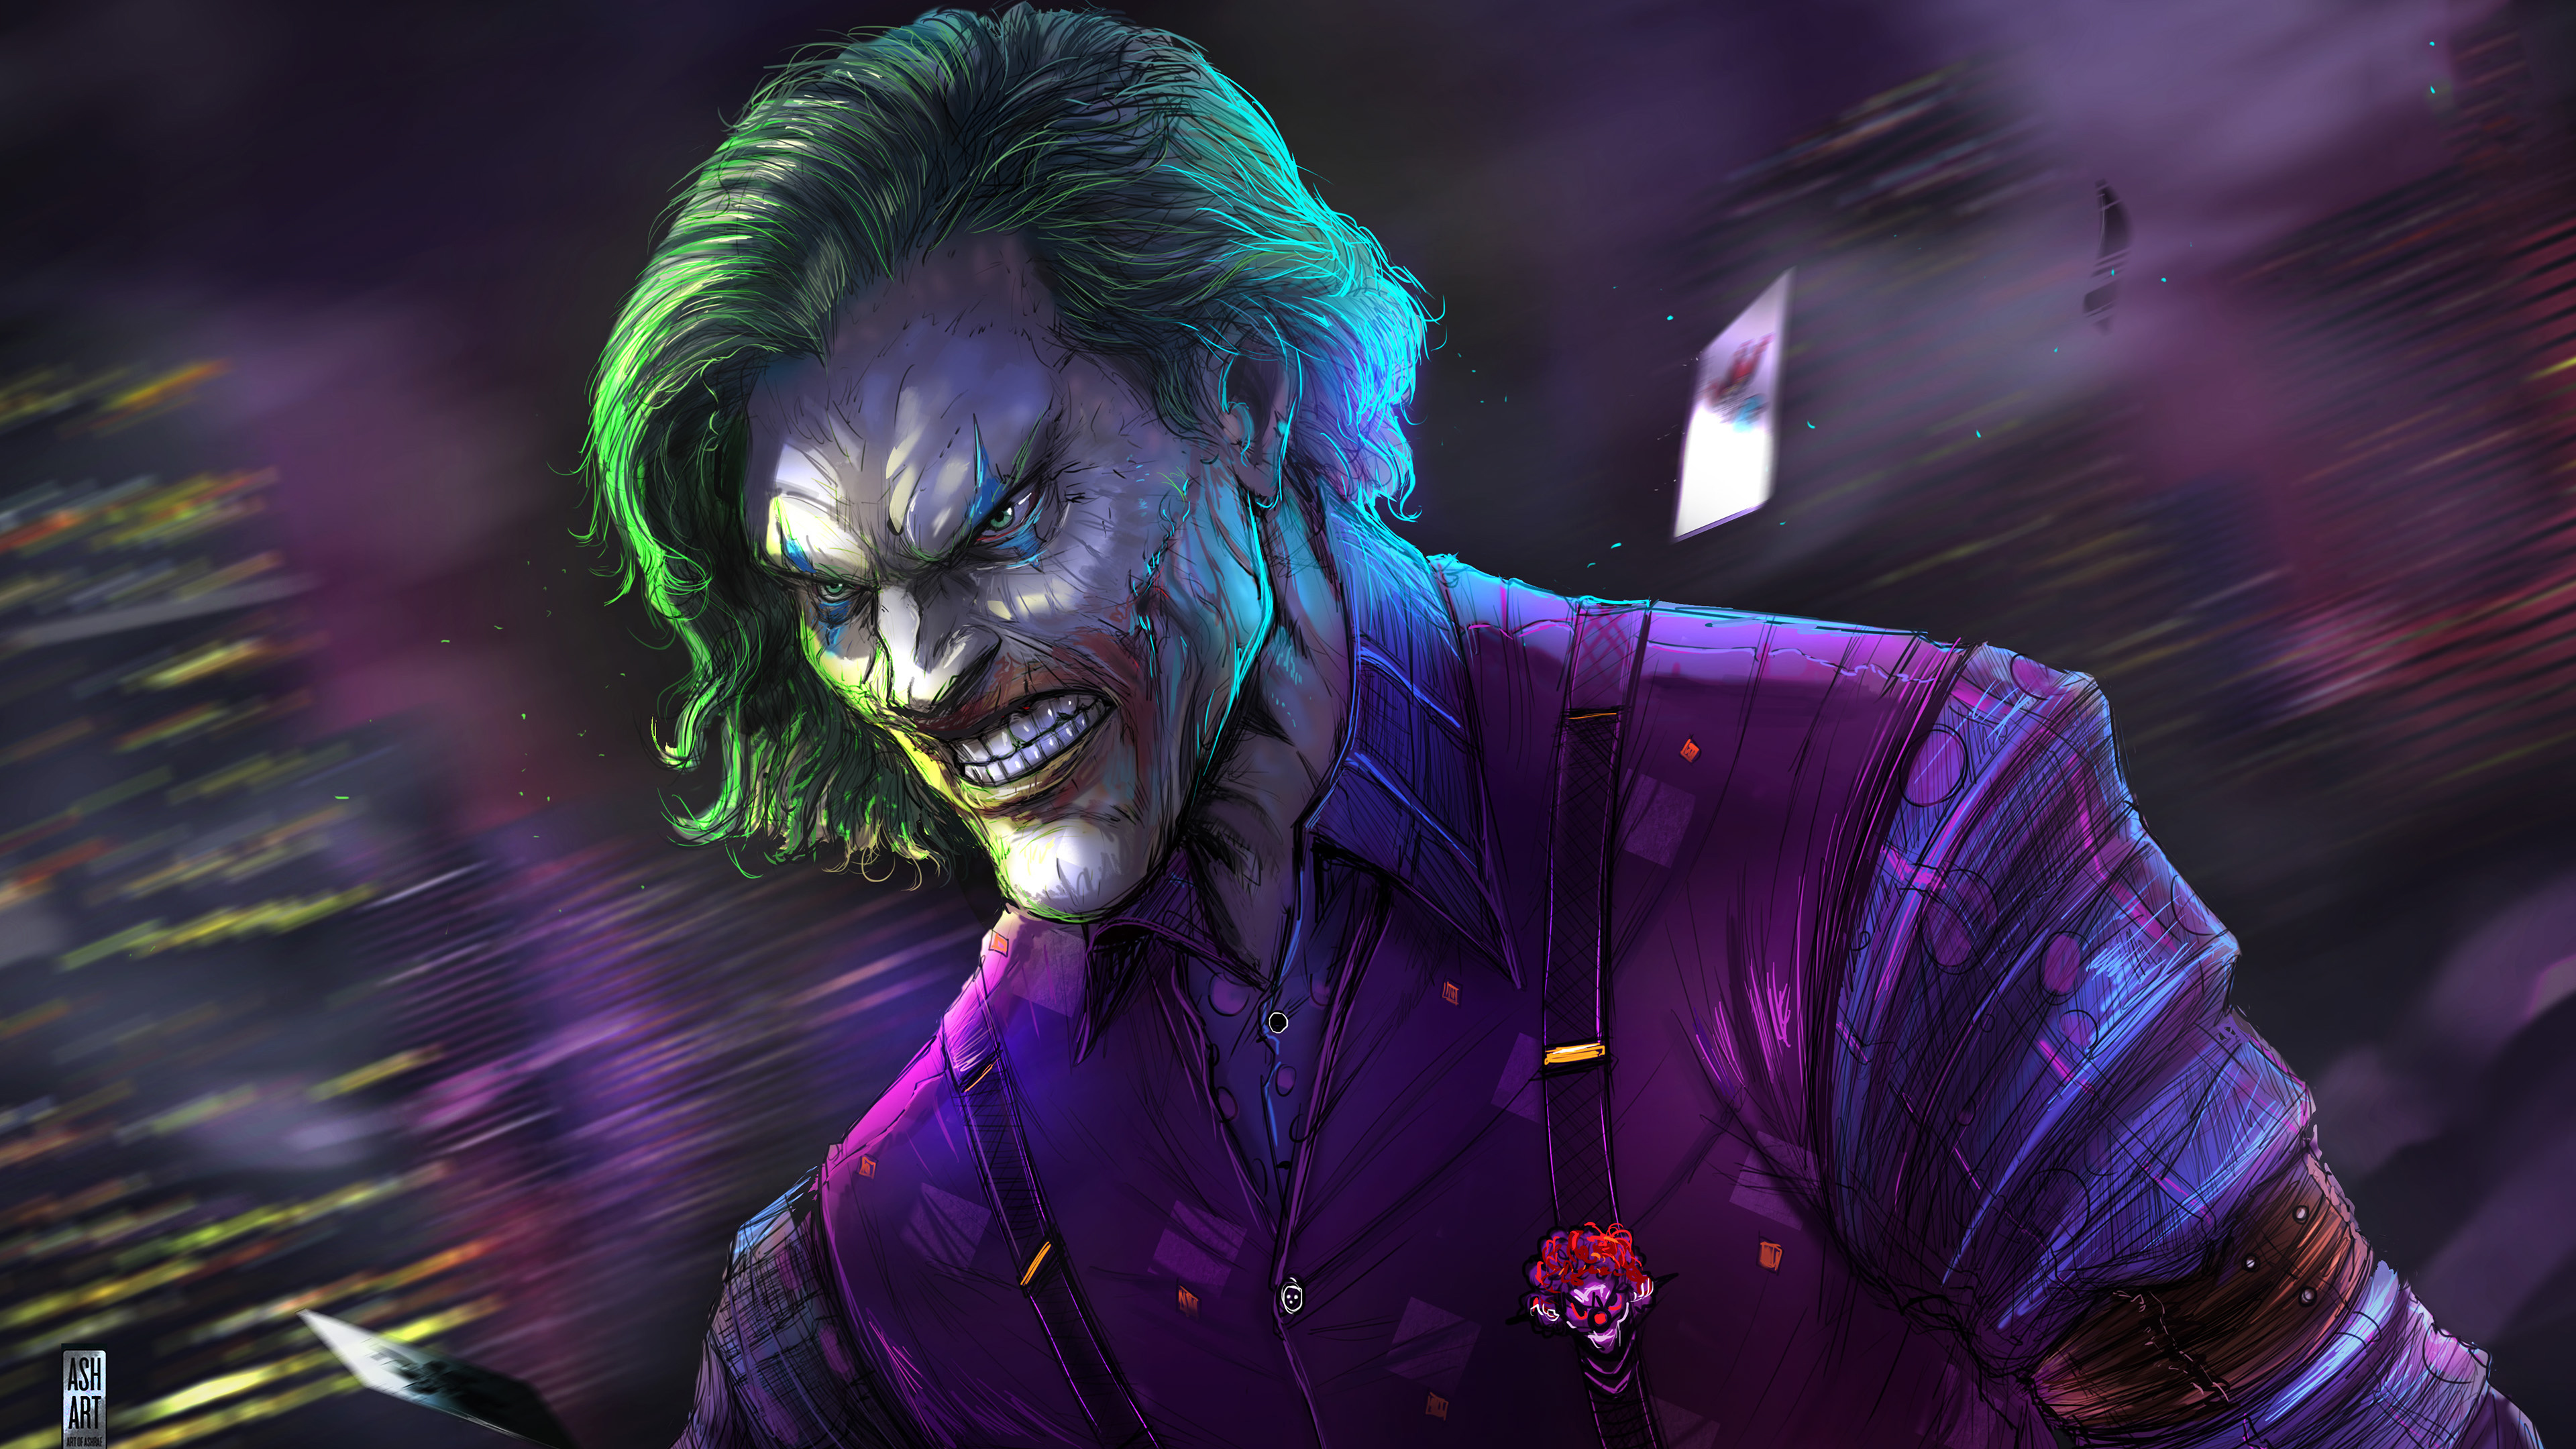 Color portrait of the joker character known from the Batman movie series HD  wallpaper download